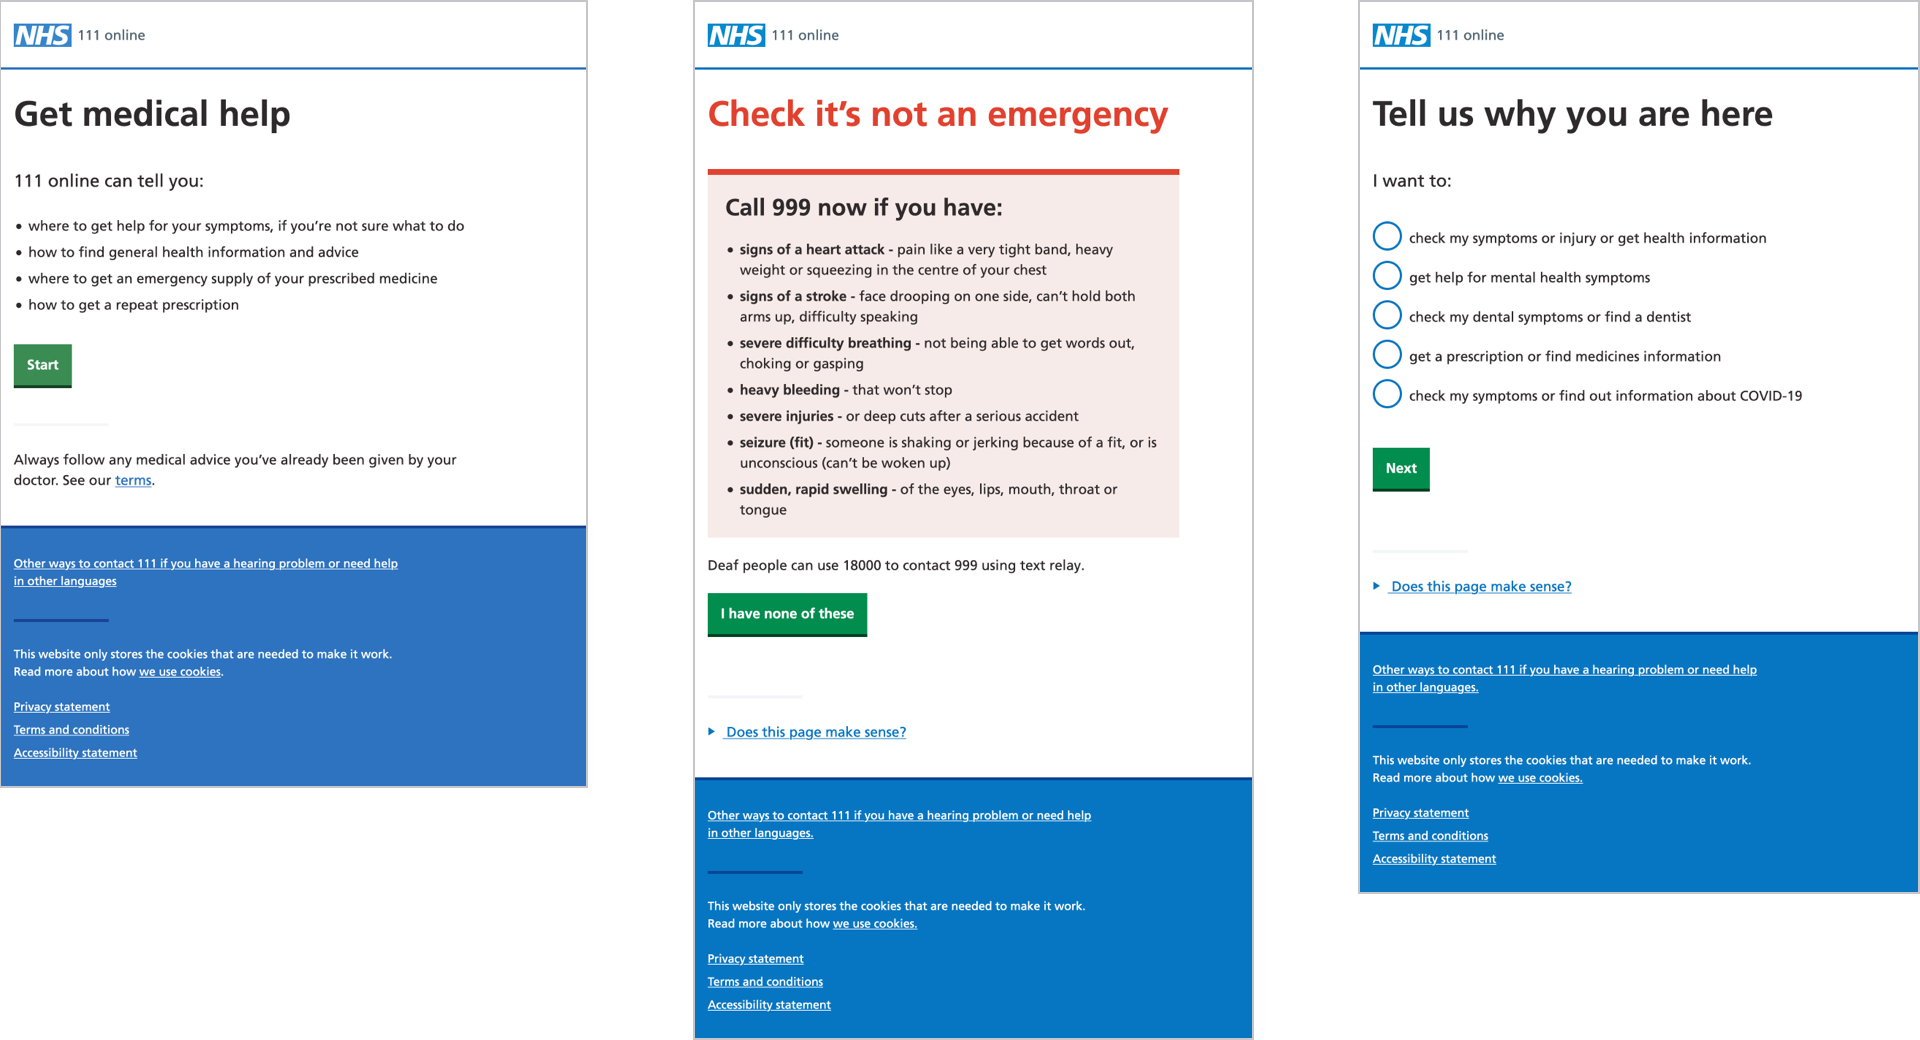 Screen grabs of the original first 3 steps of 111.nhs.uk